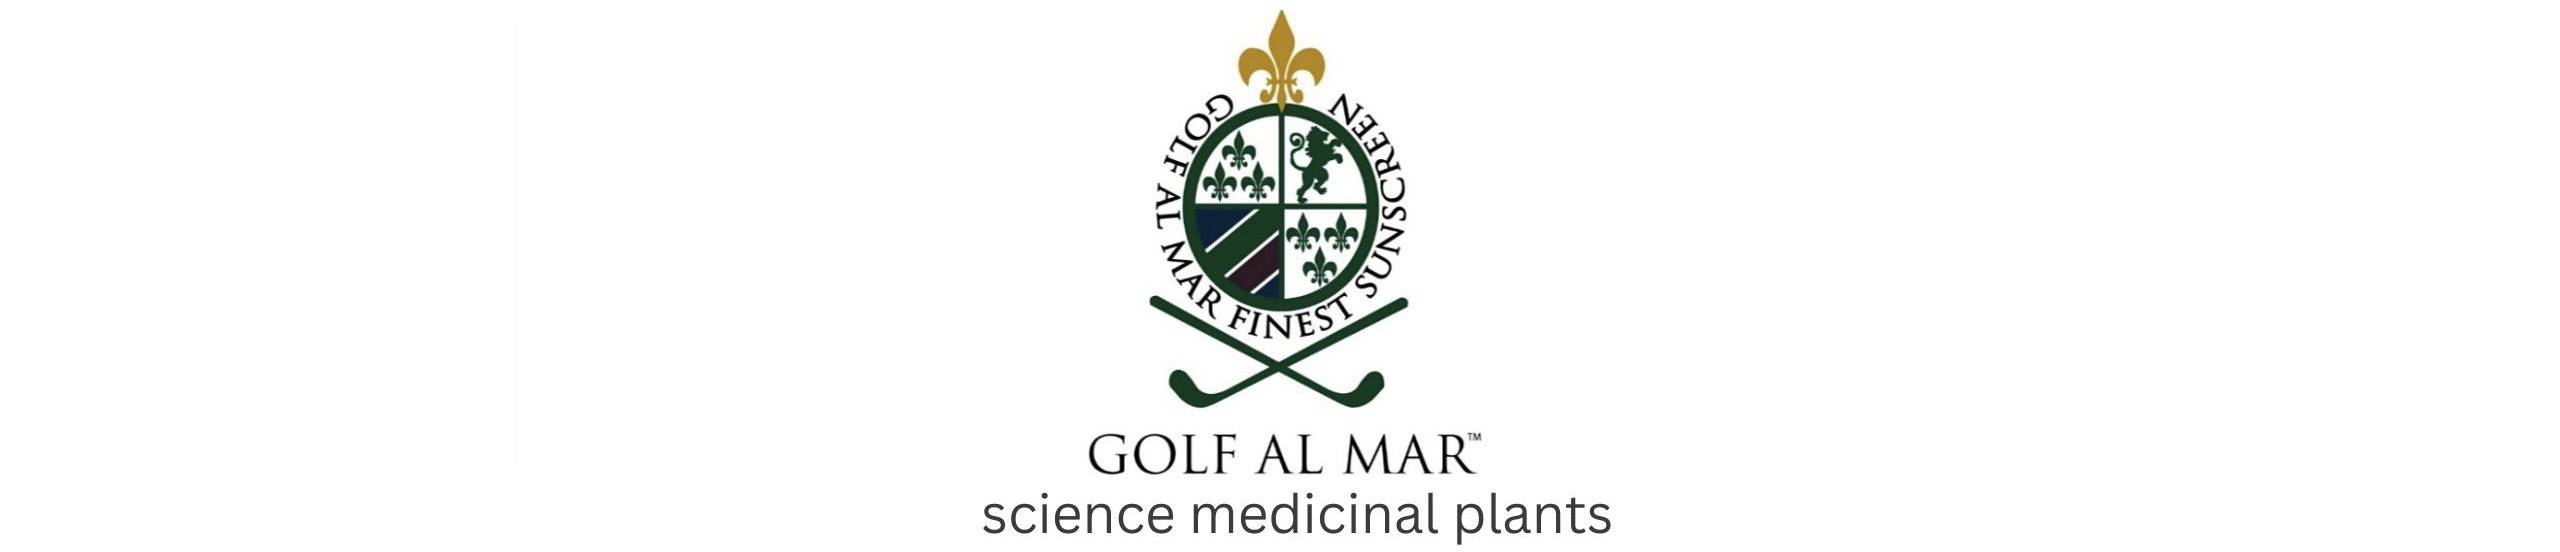 GOLF AL MAR ……made to improve your game